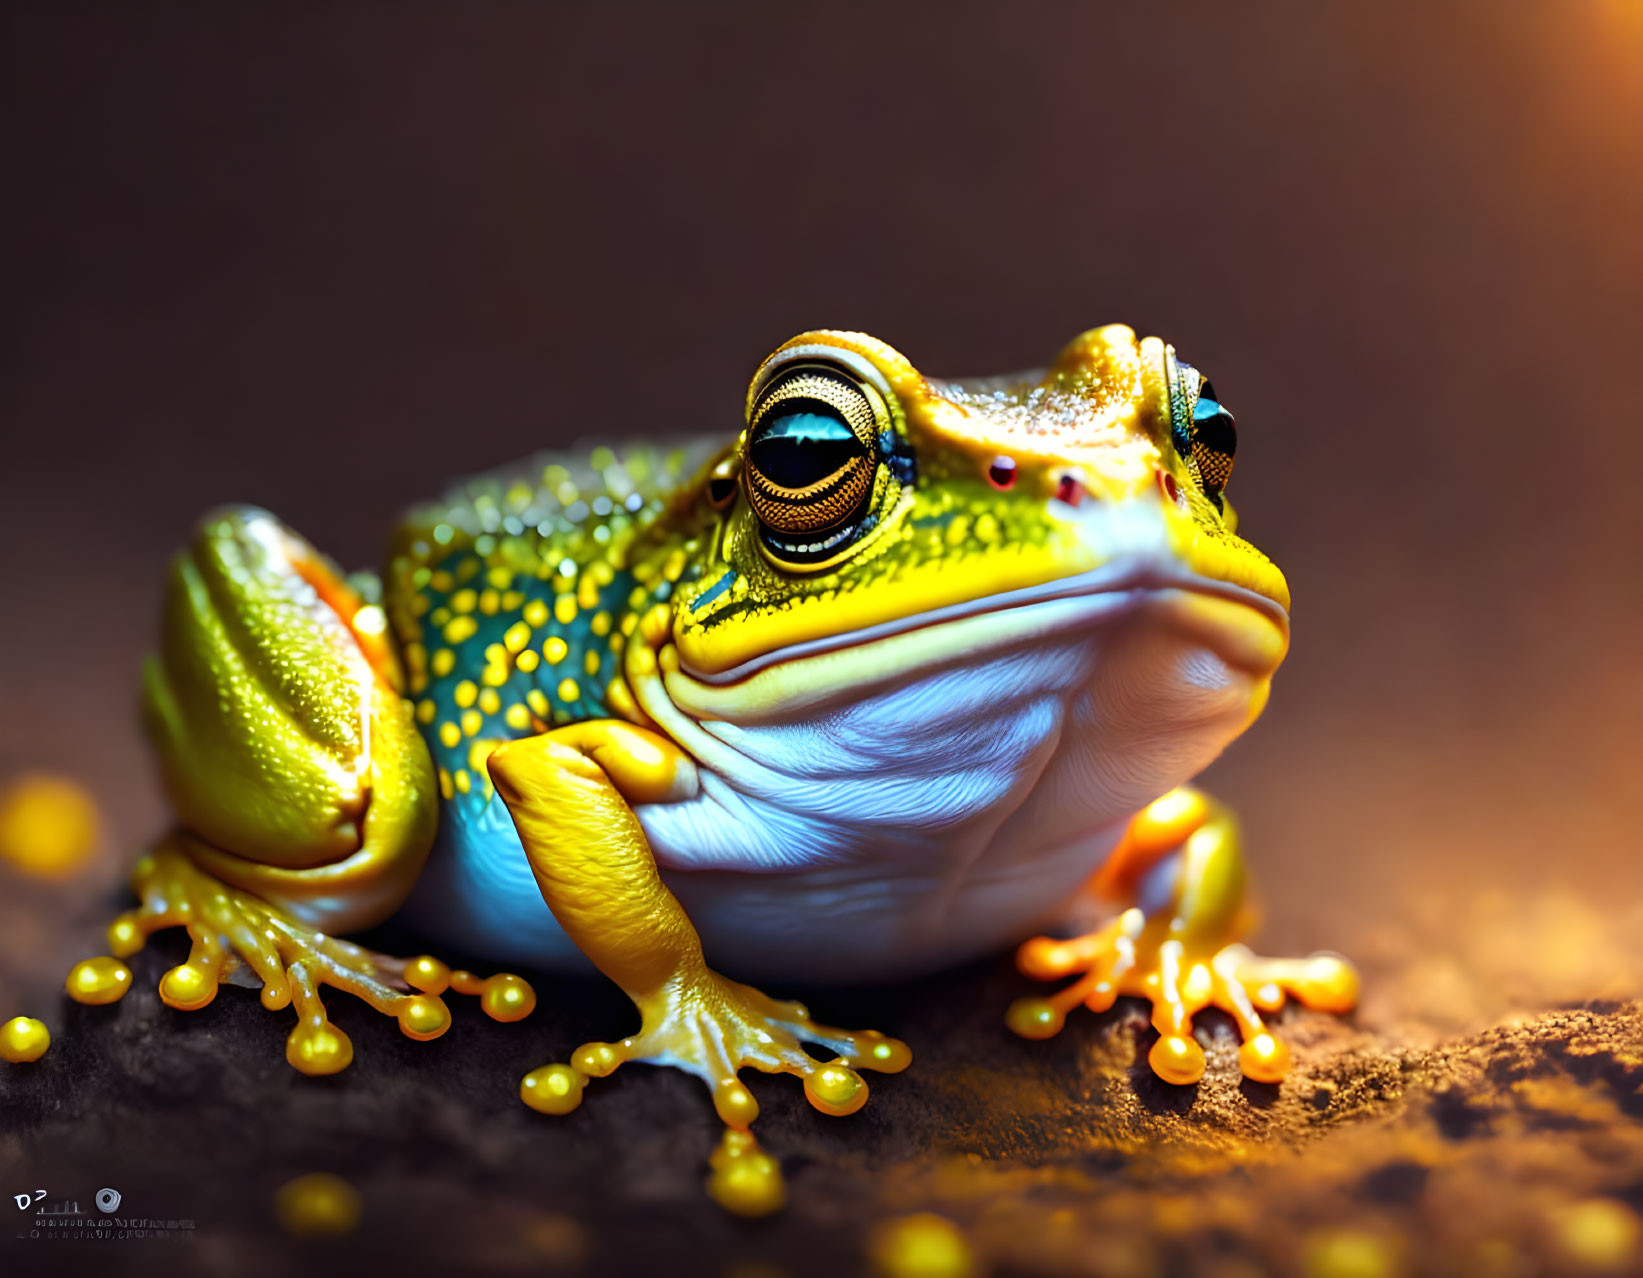 Colorful Frog with Glossy, Bumpy Skin on Textured Surface